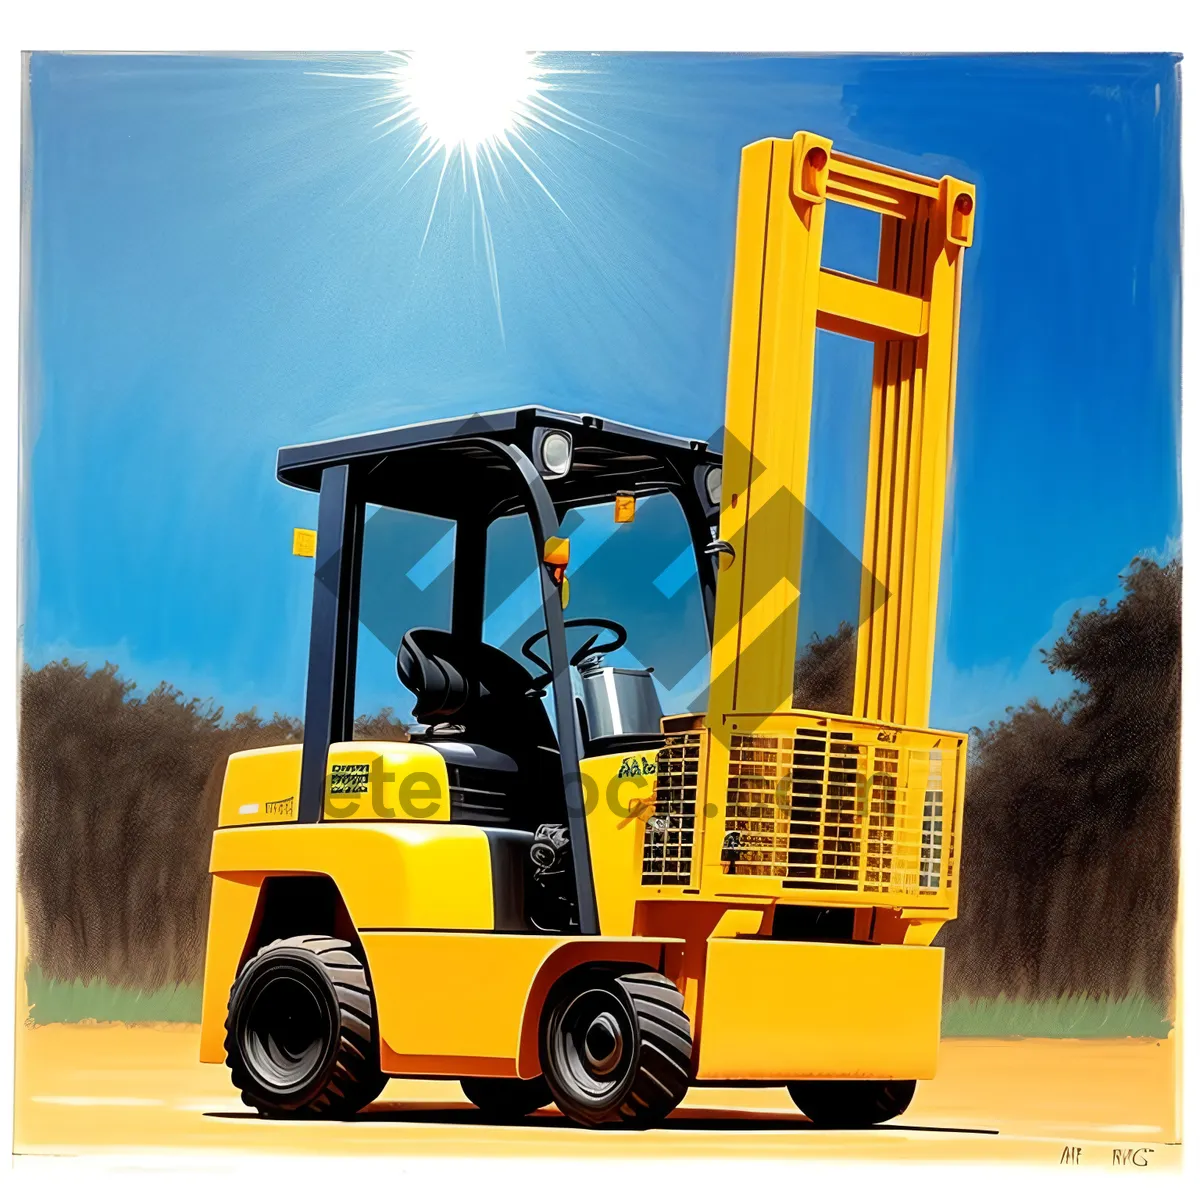 Picture of Yellow Heavy Equipment Forklift at Construction Site